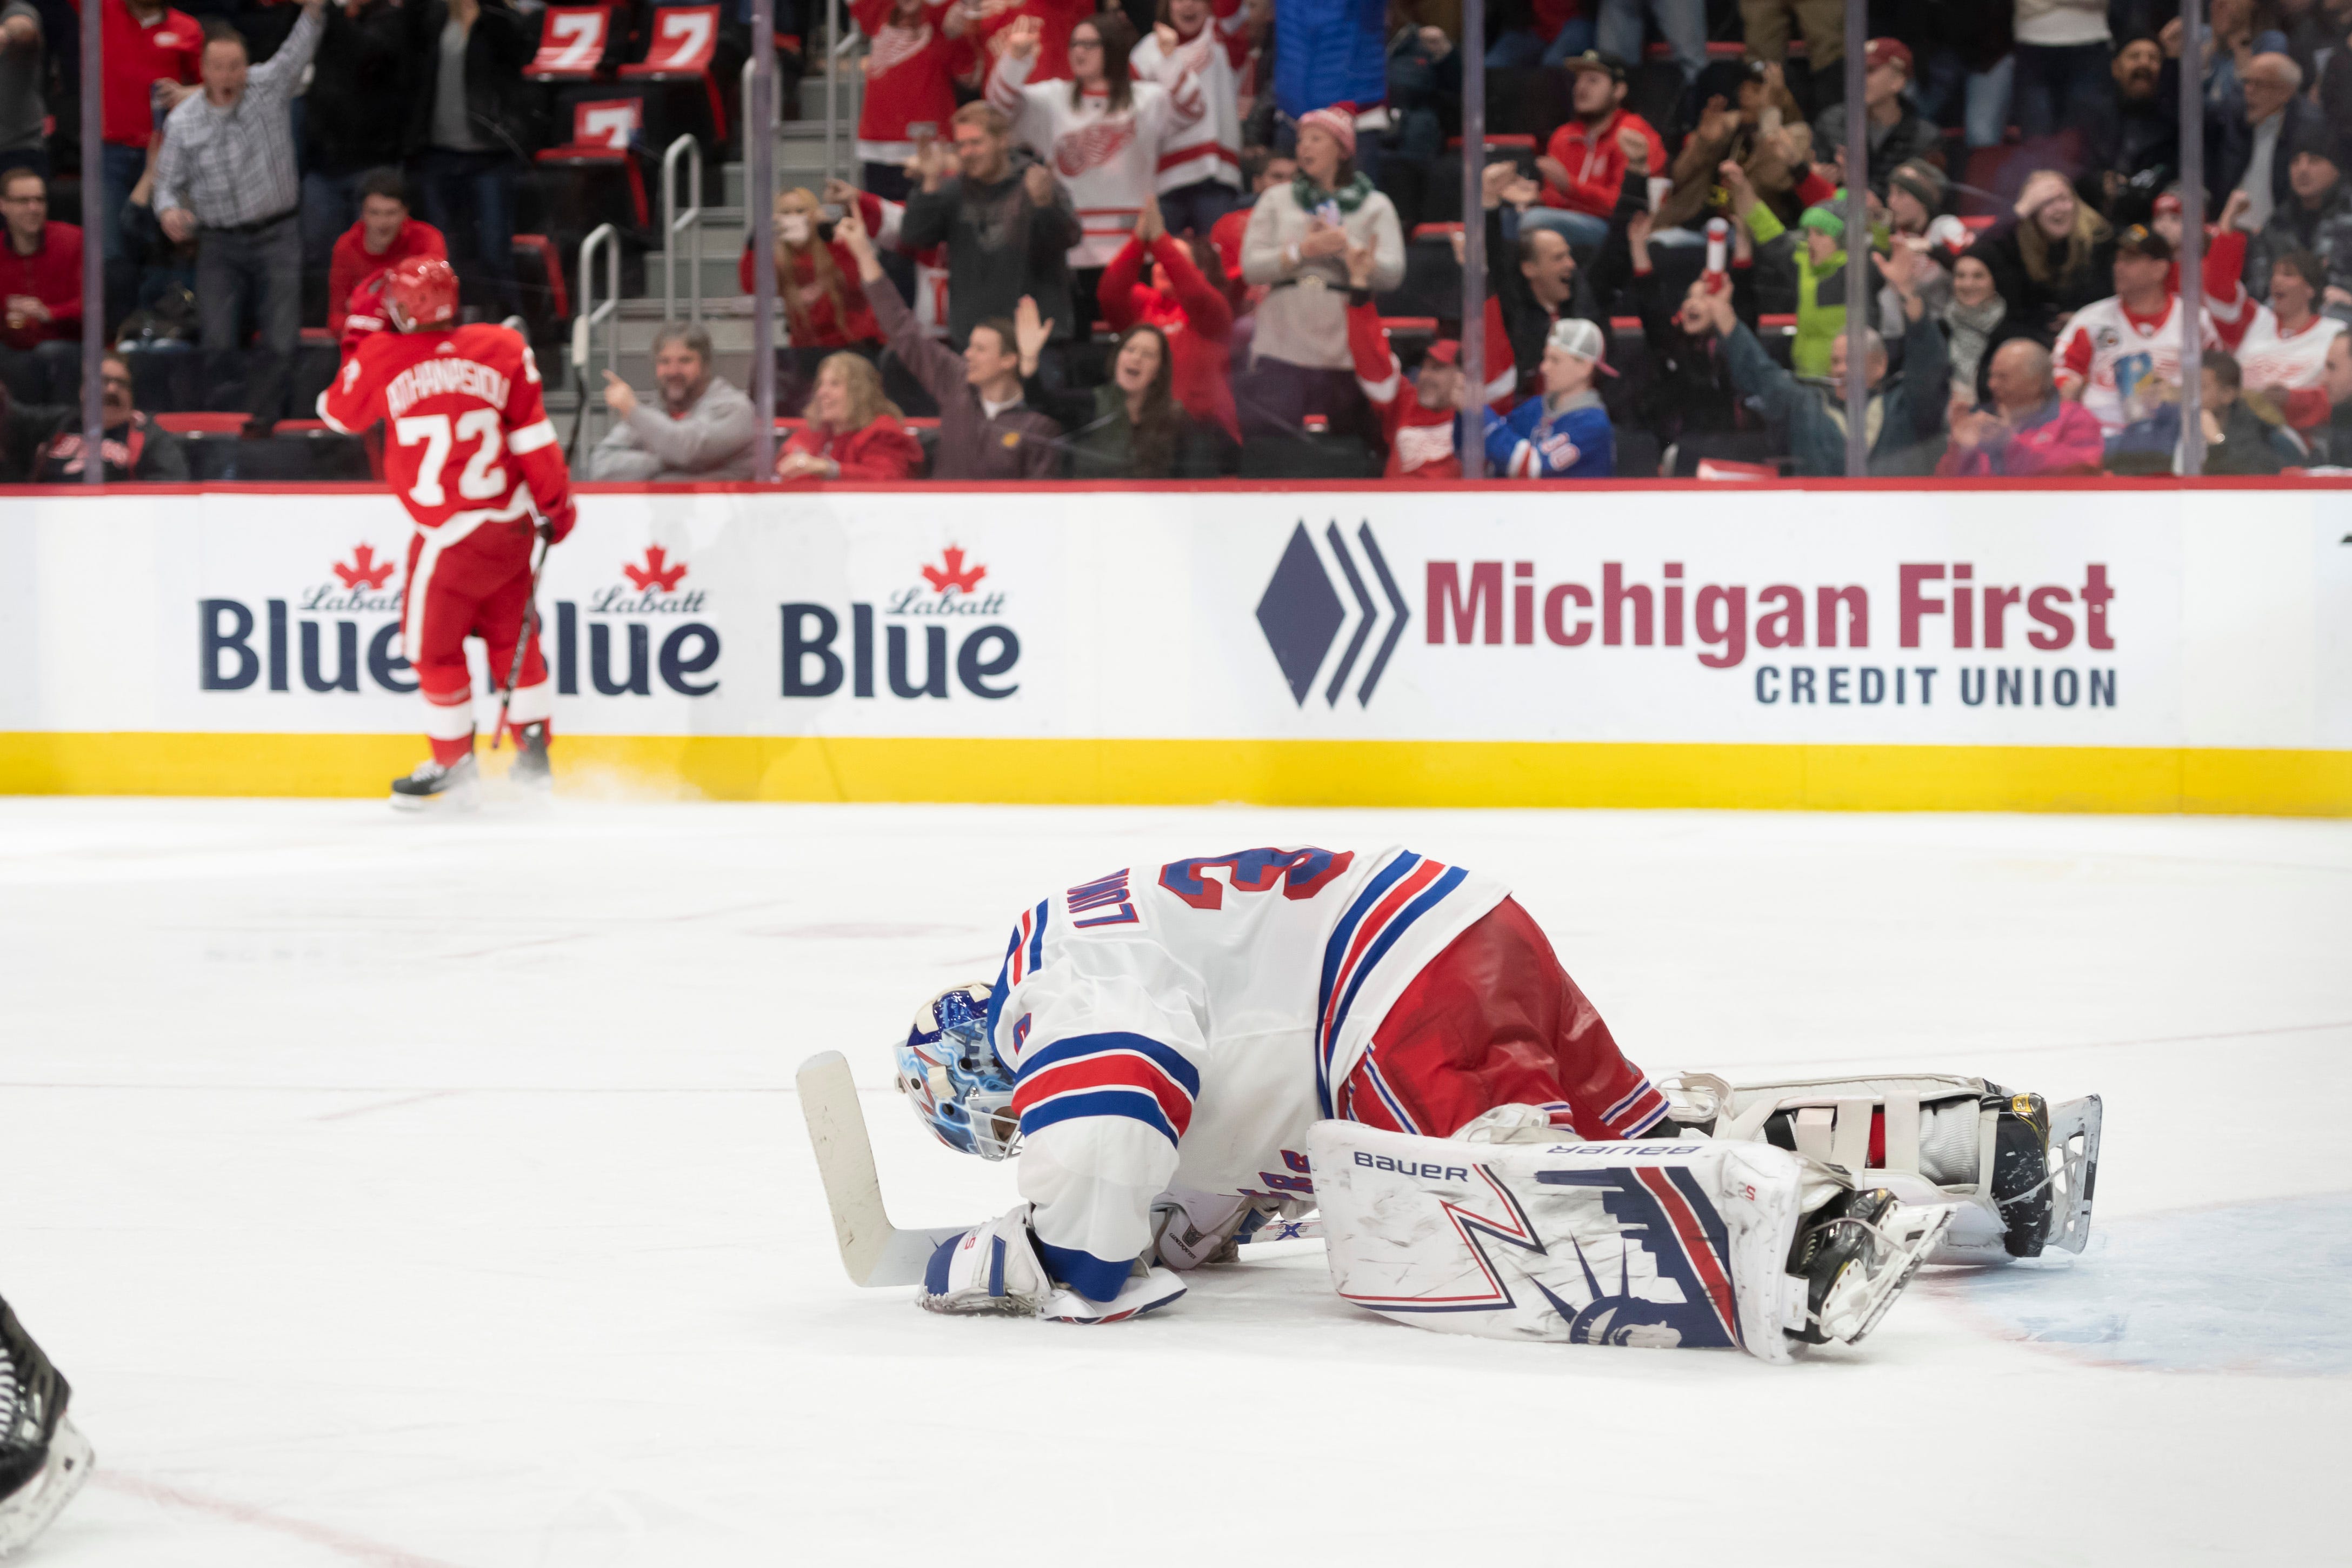 New York goaltender Henrik Lundqvist hits the ice after being scored on by Detroit center Andreas Athanasiou in the third period.